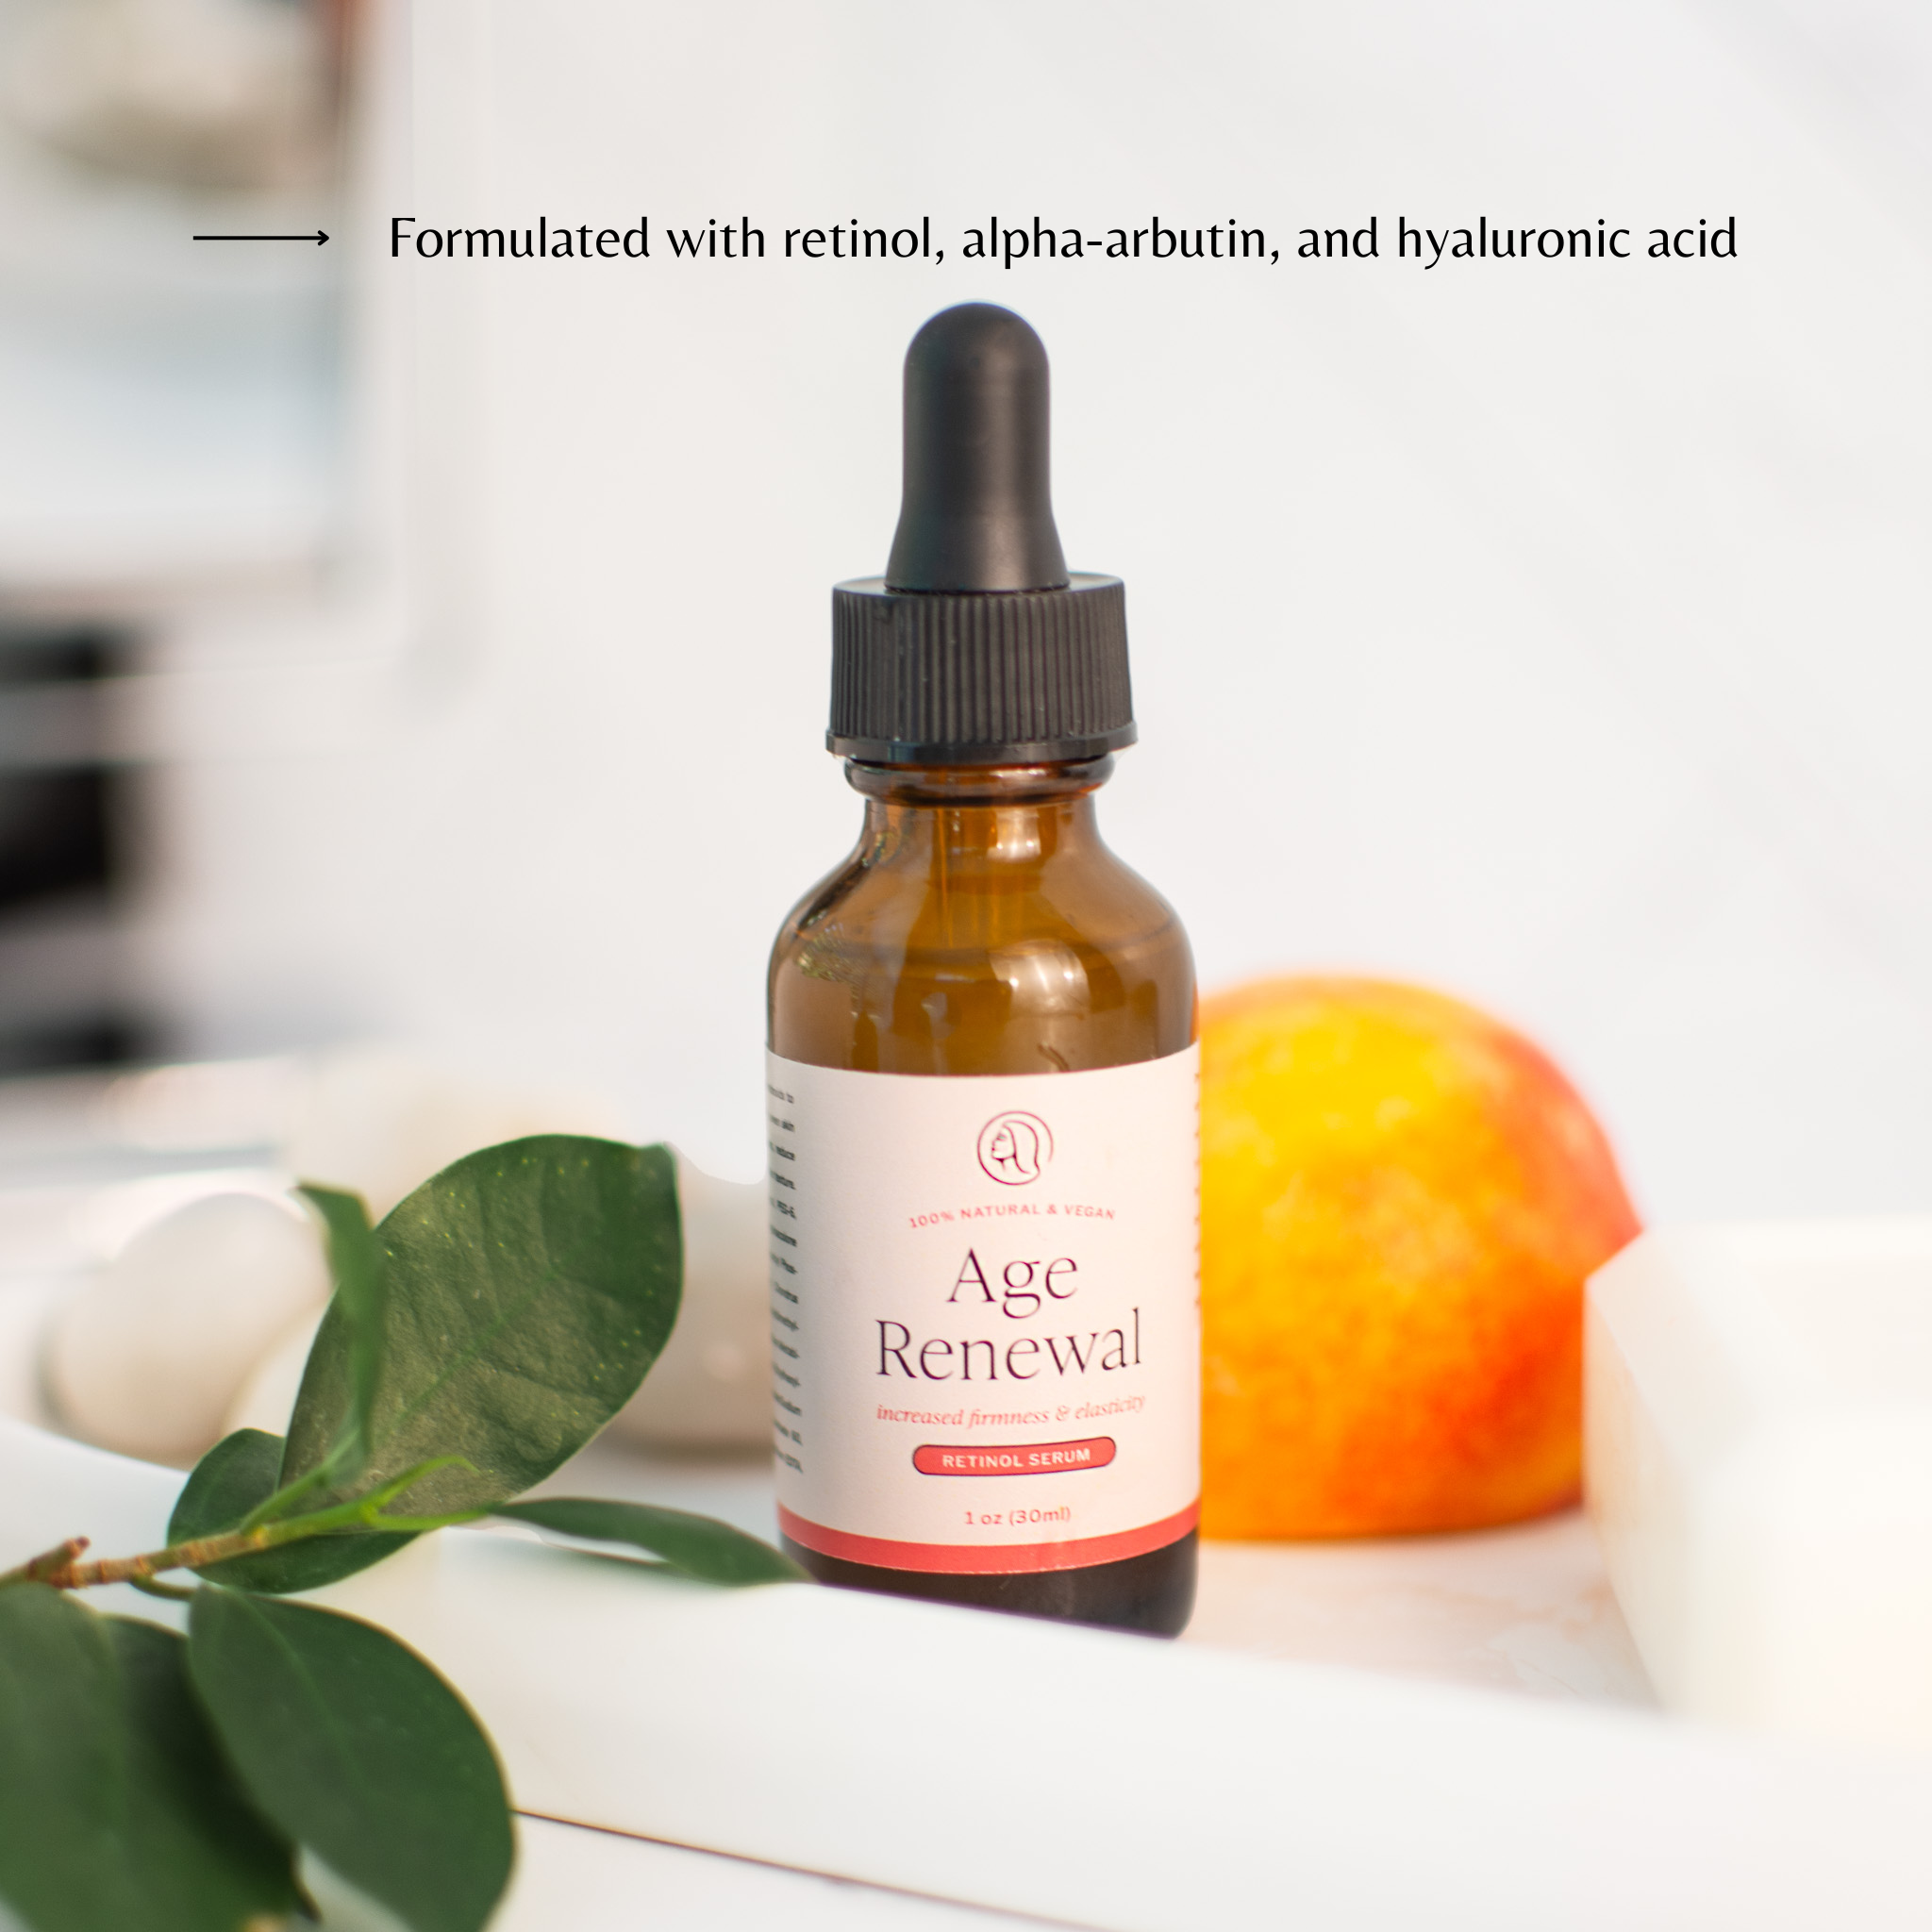 Age Renewal, retinol serum from Mavian Beauty placed with a peach